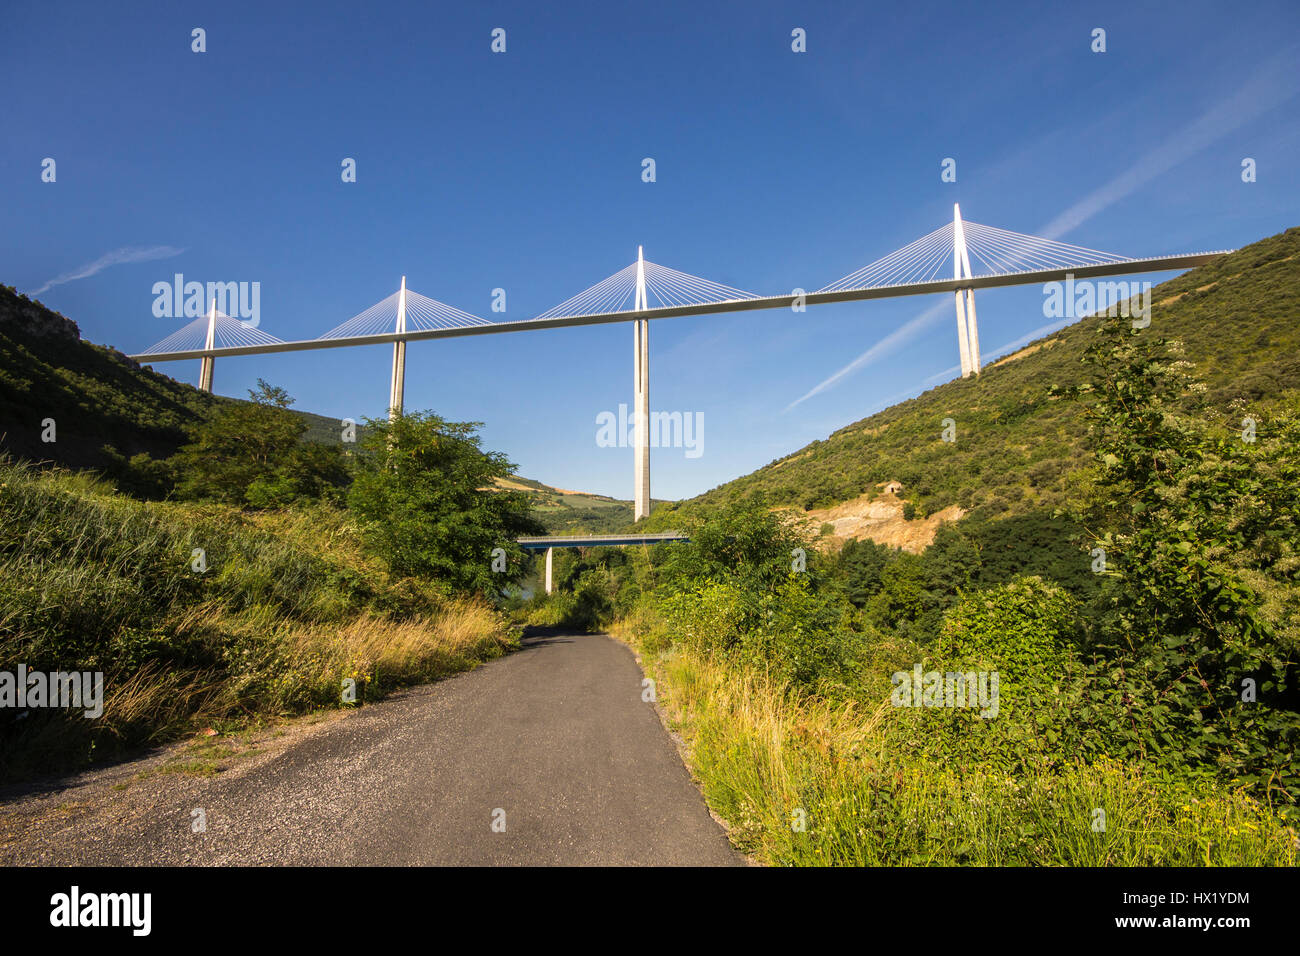 The Millau Viaduct, a cable-stayed bridge that spans the valley of the River Tarn near Millau in southern France. Tallest bridge in the world. Stock Photo